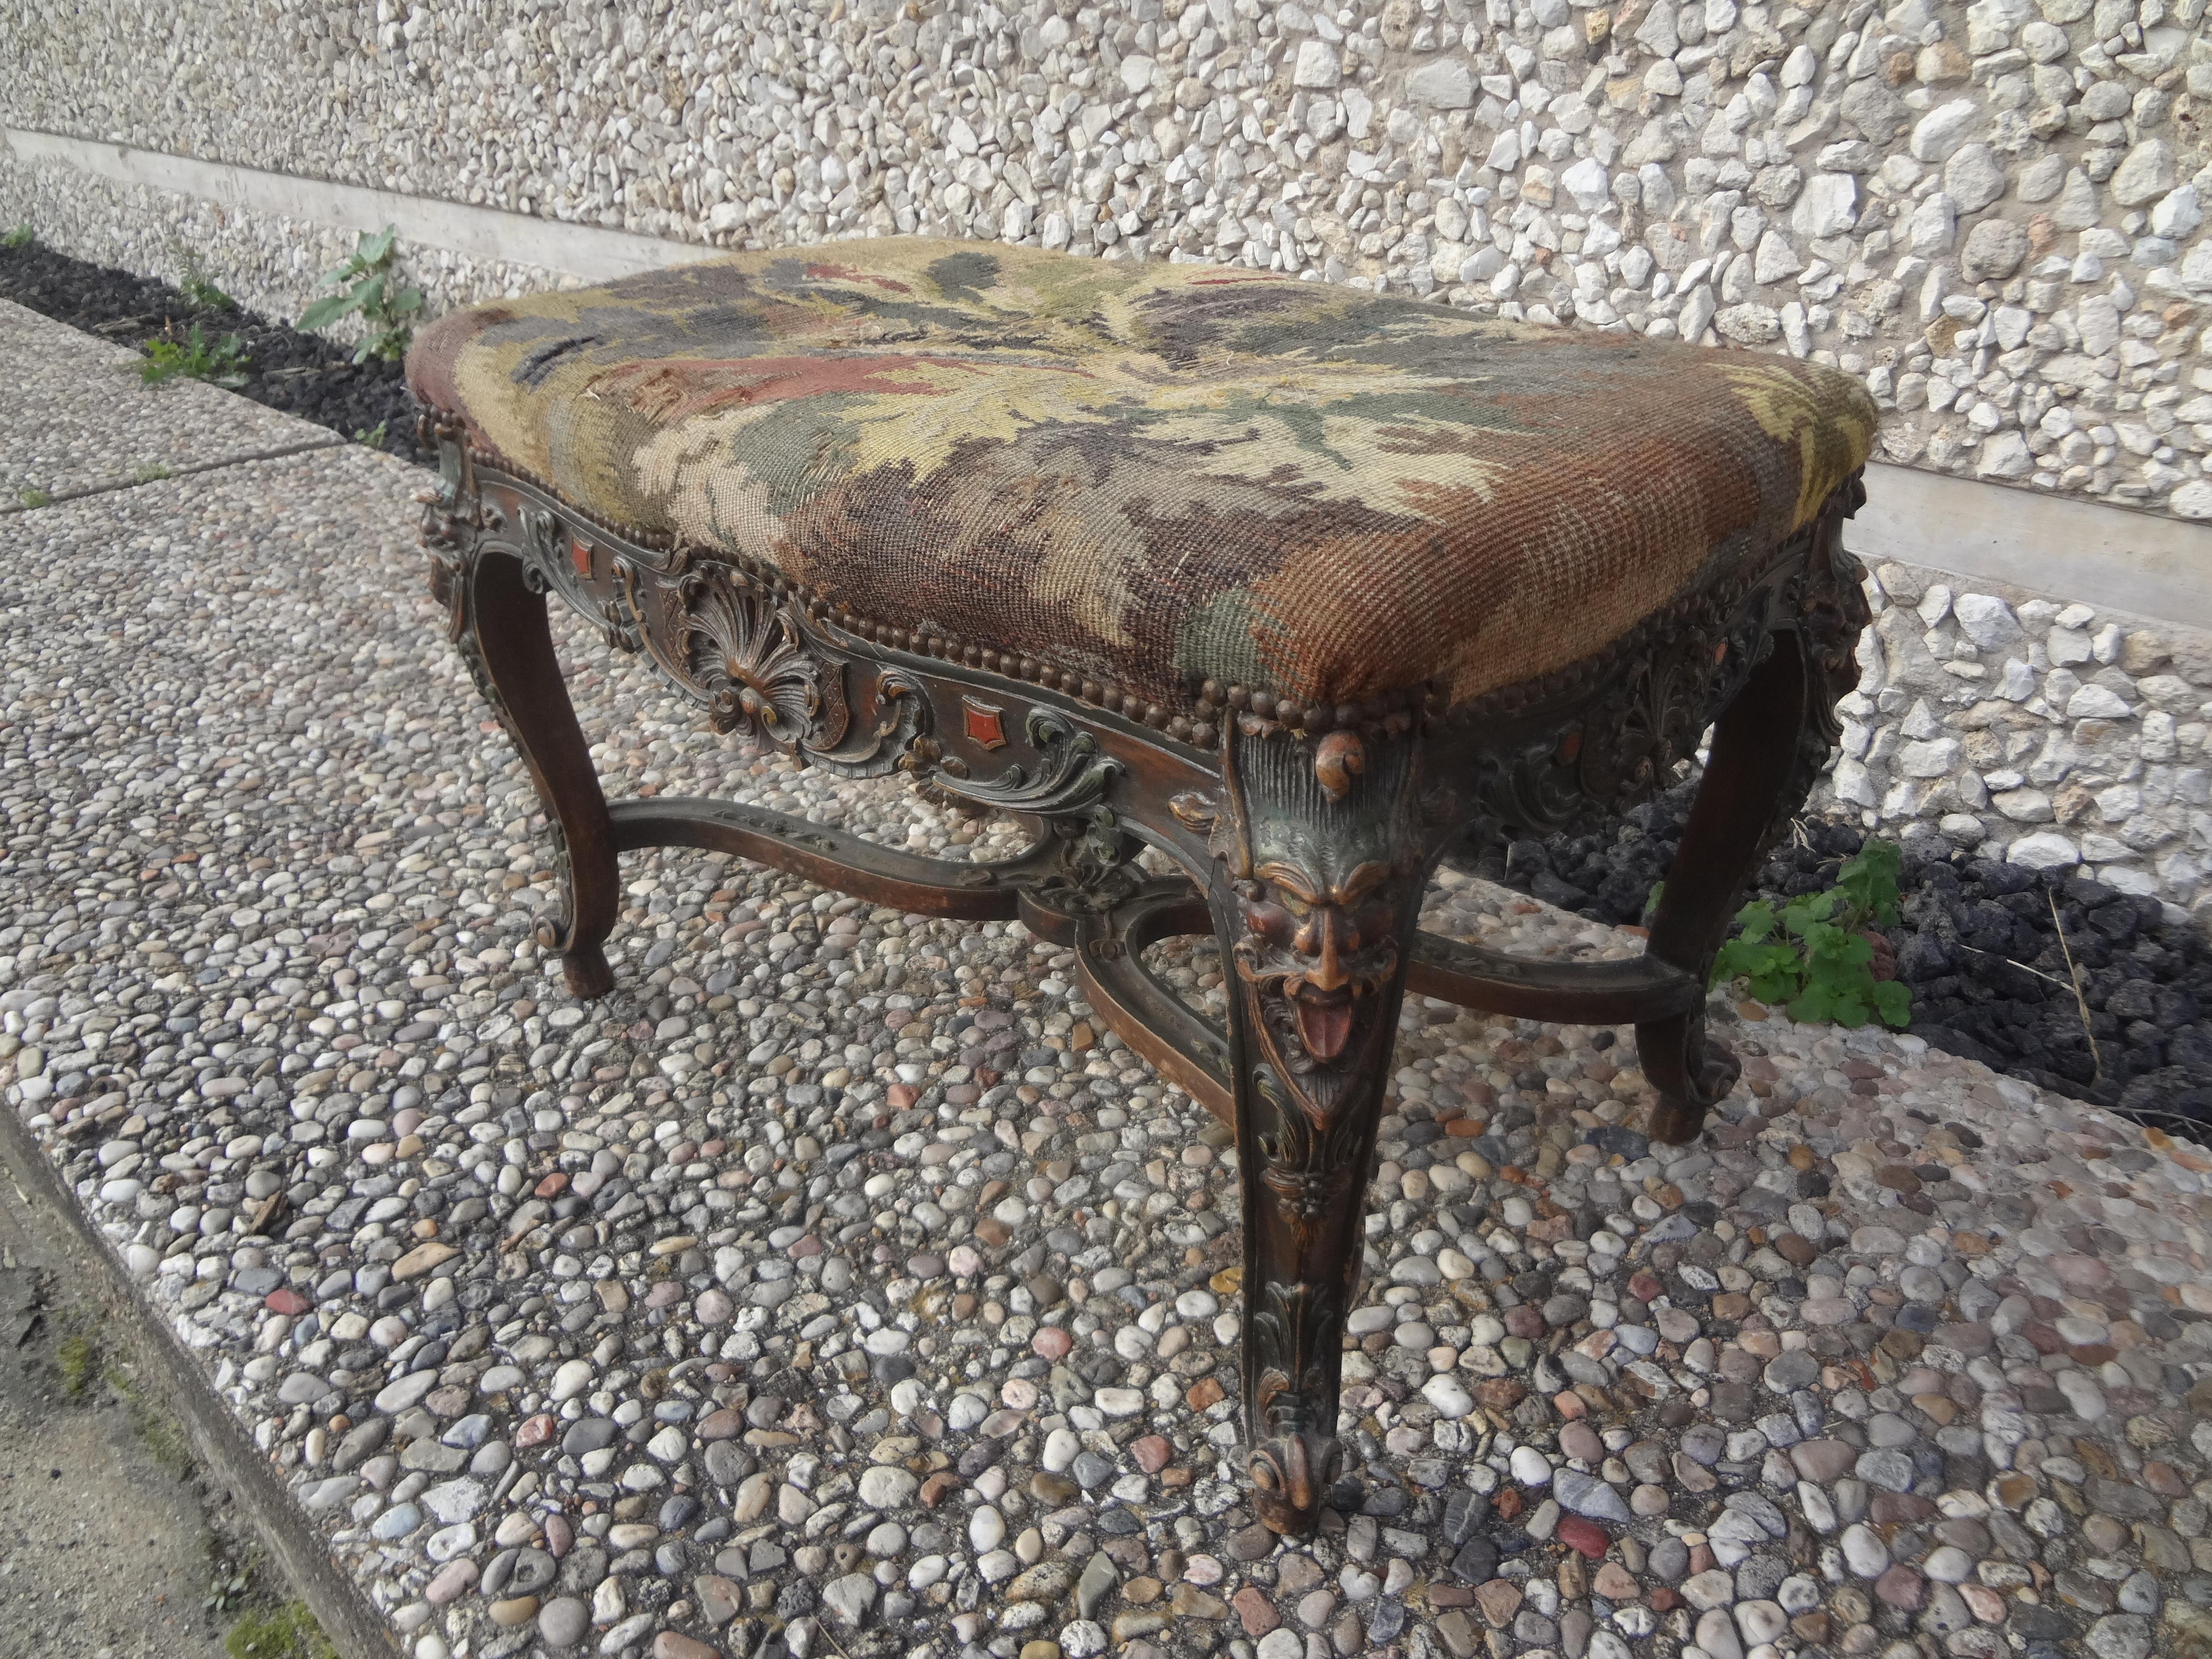 19th Century French Louis XIV Style Bench.
Our mid 19th century French Louis XIV style bench has beautifully carved legs connected by a lovely stretcher decorated with grotesque masks at each corner.
Our bench was acquired with antique tapestry